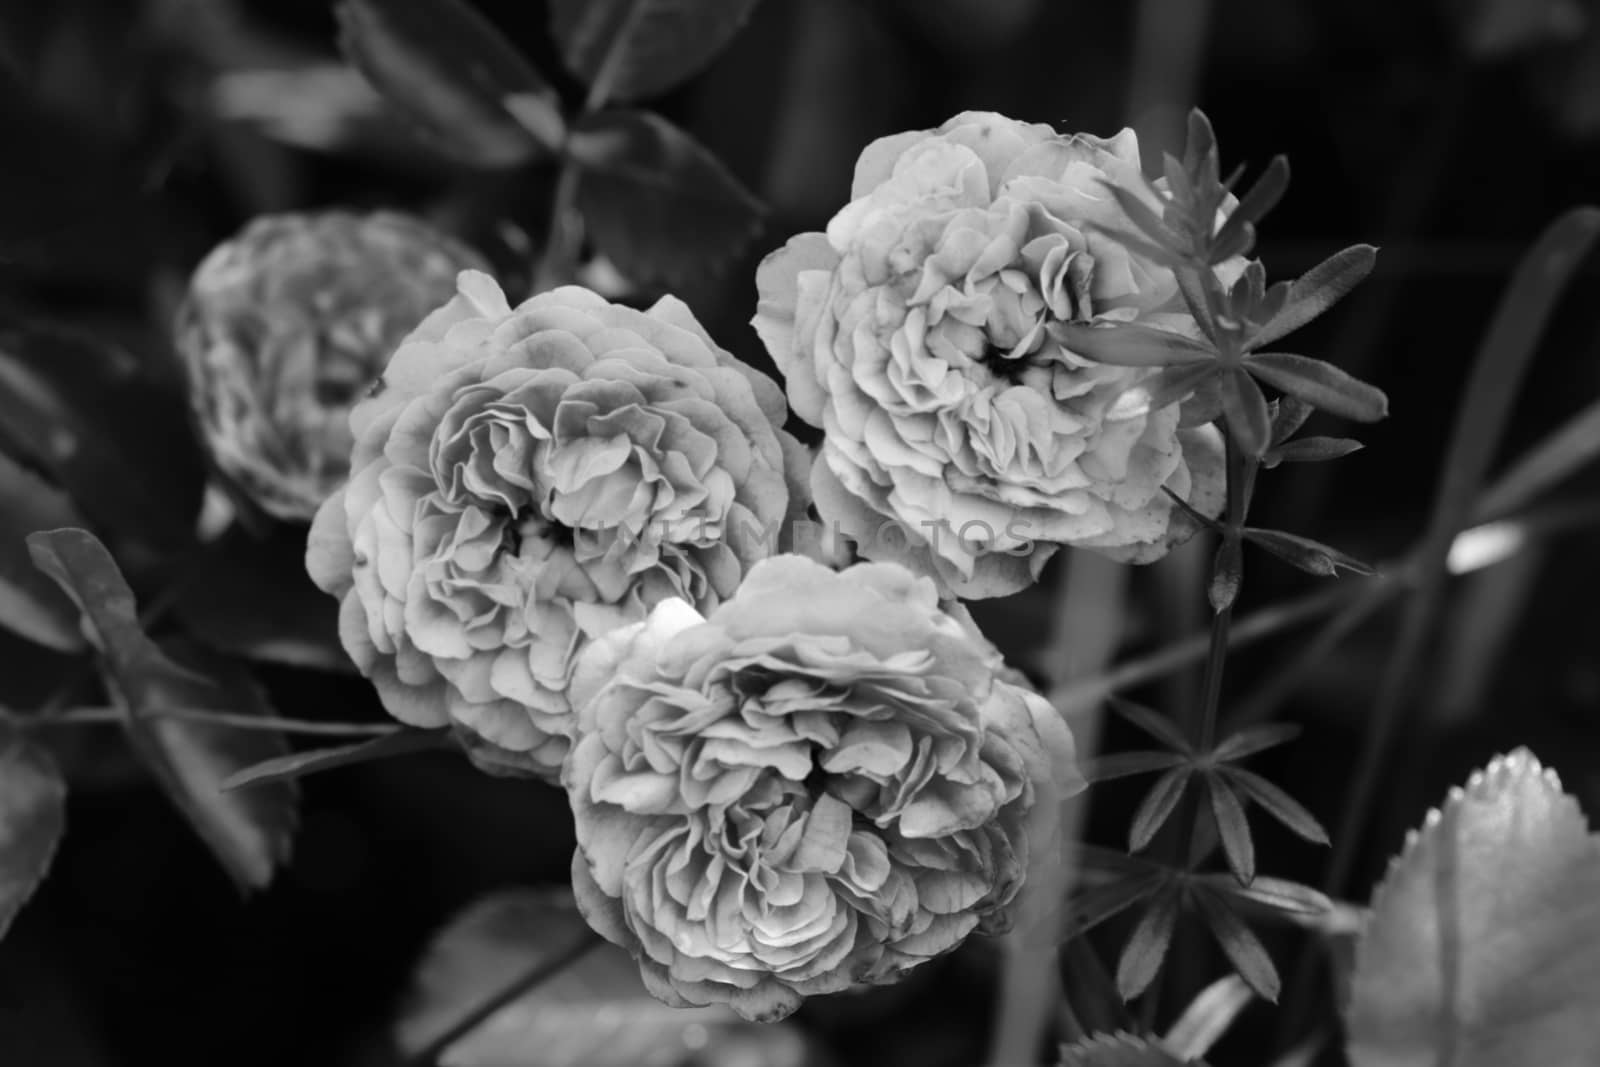 Rose buds in the garden black and white photo. by kip02kas